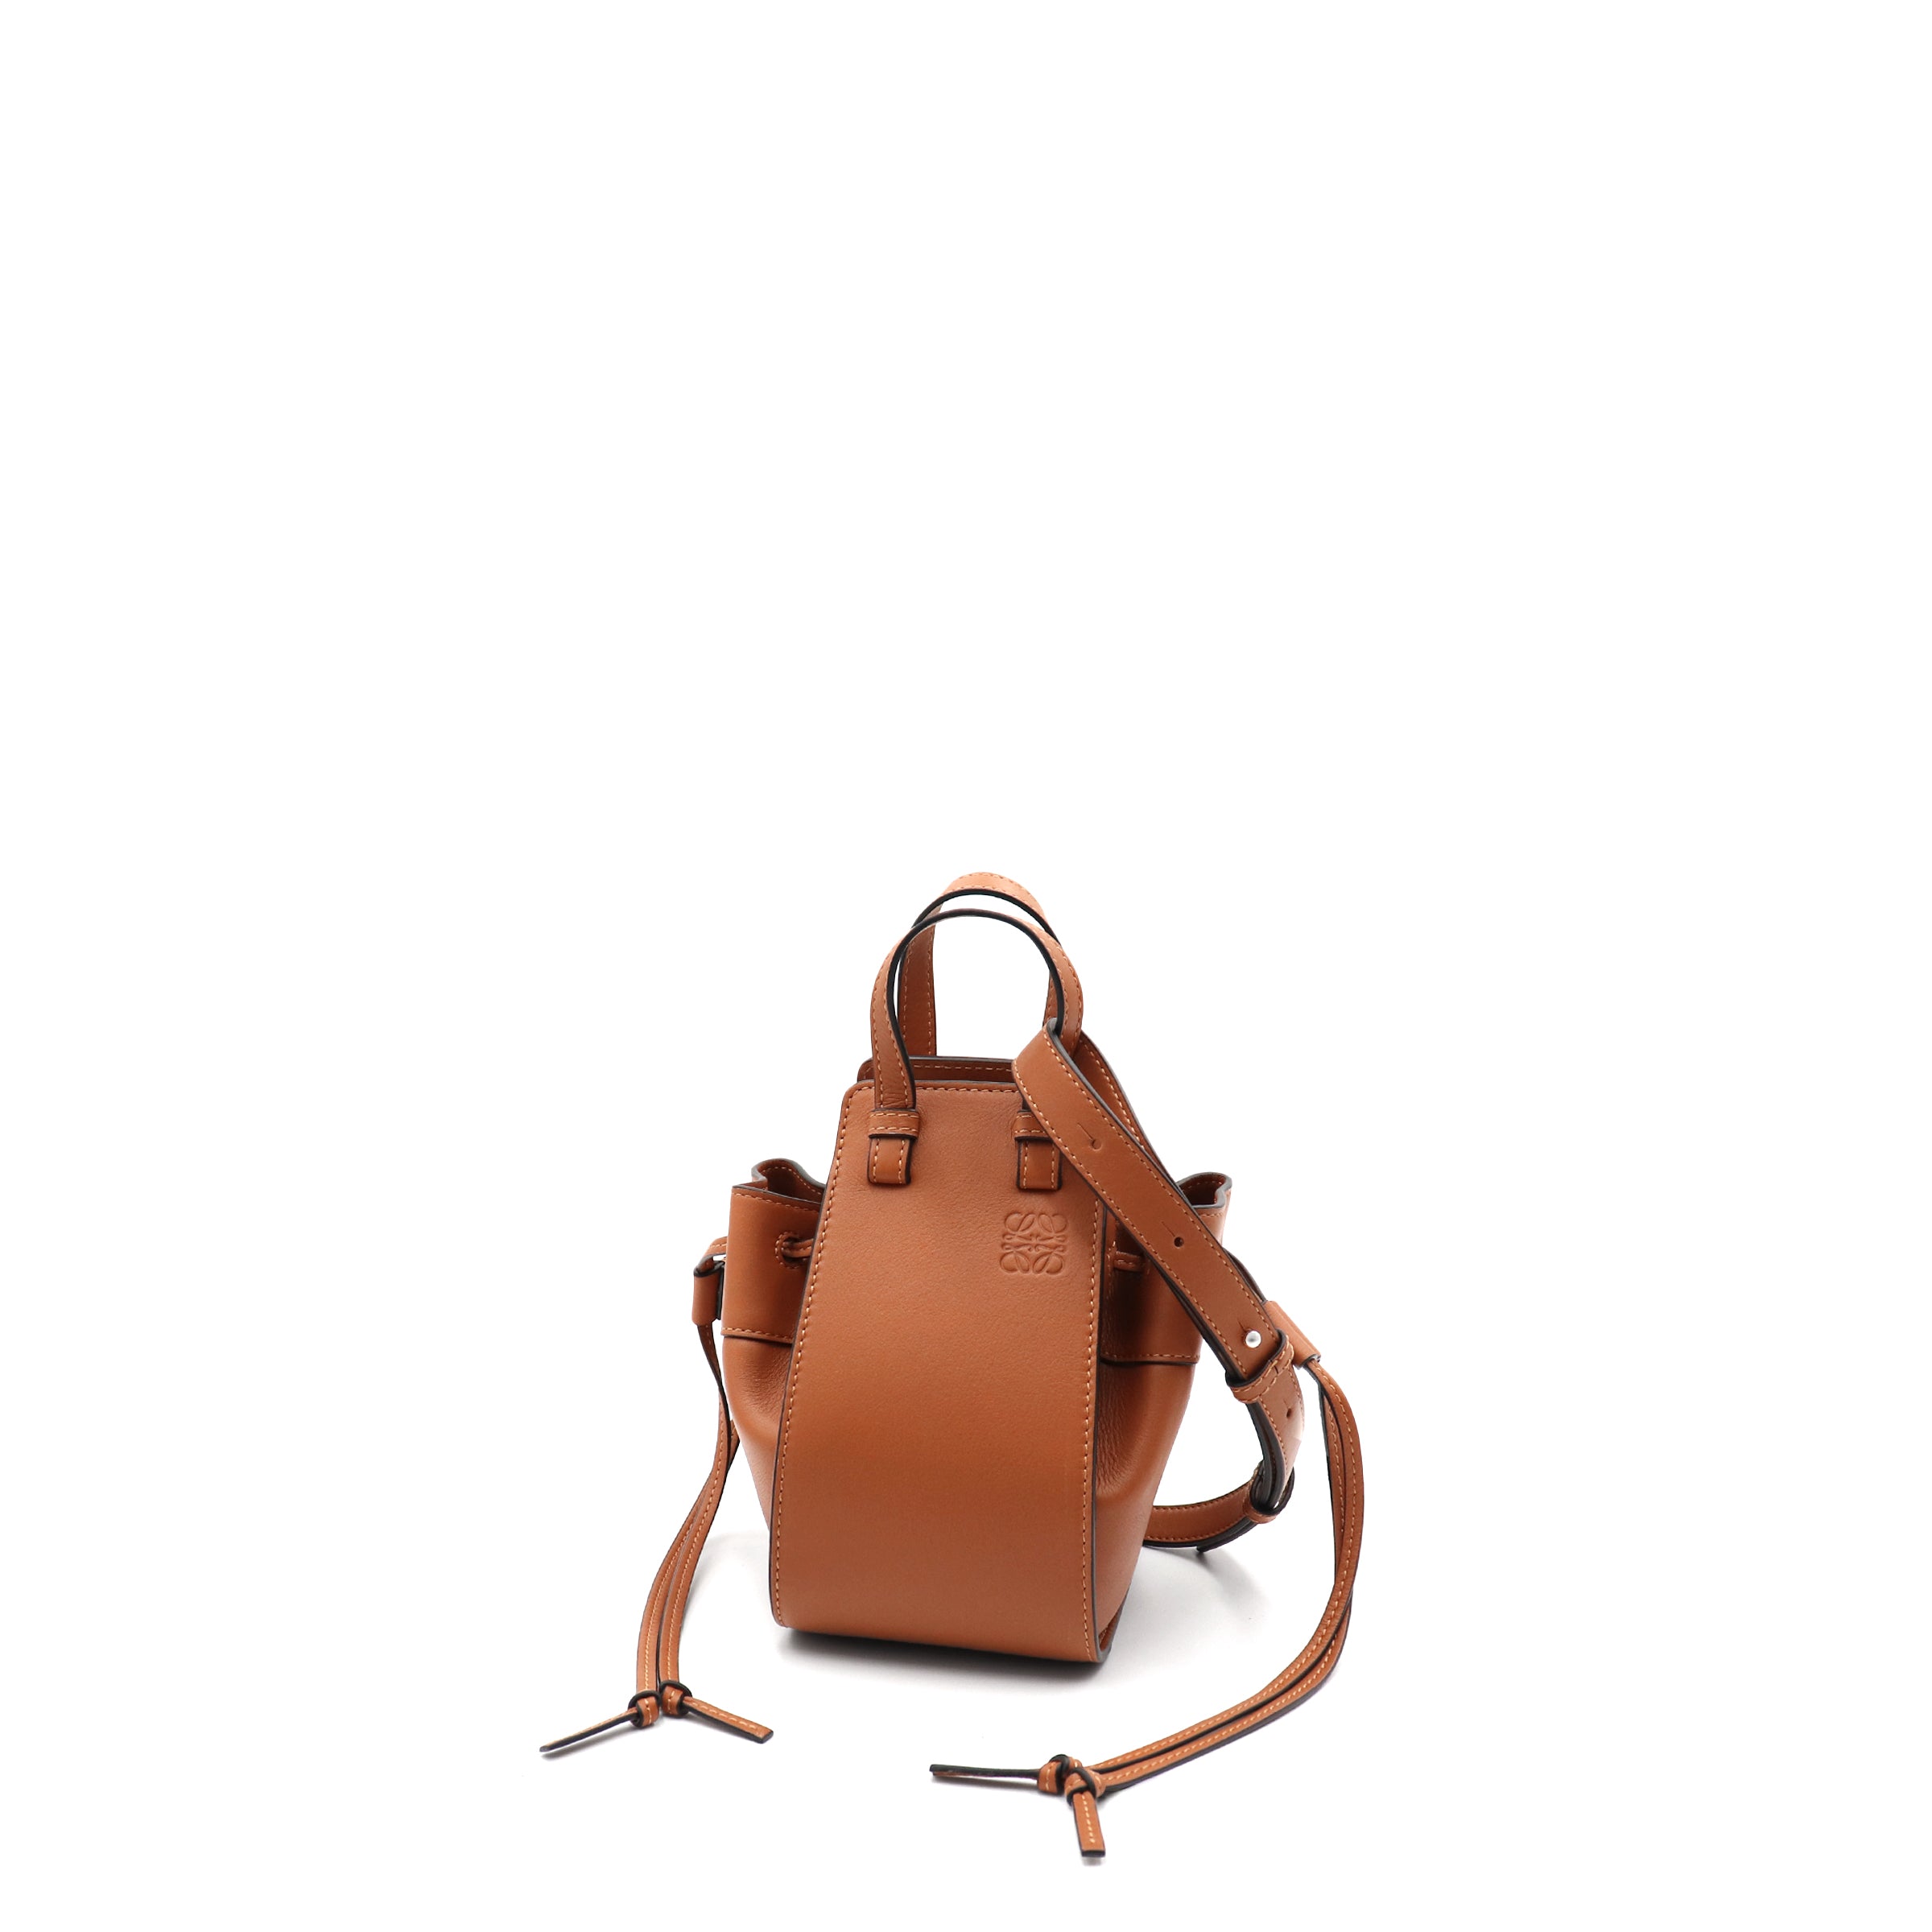 Up For Sale This Beautiful Classic Calfskin Small Tan Loewe Puzzle